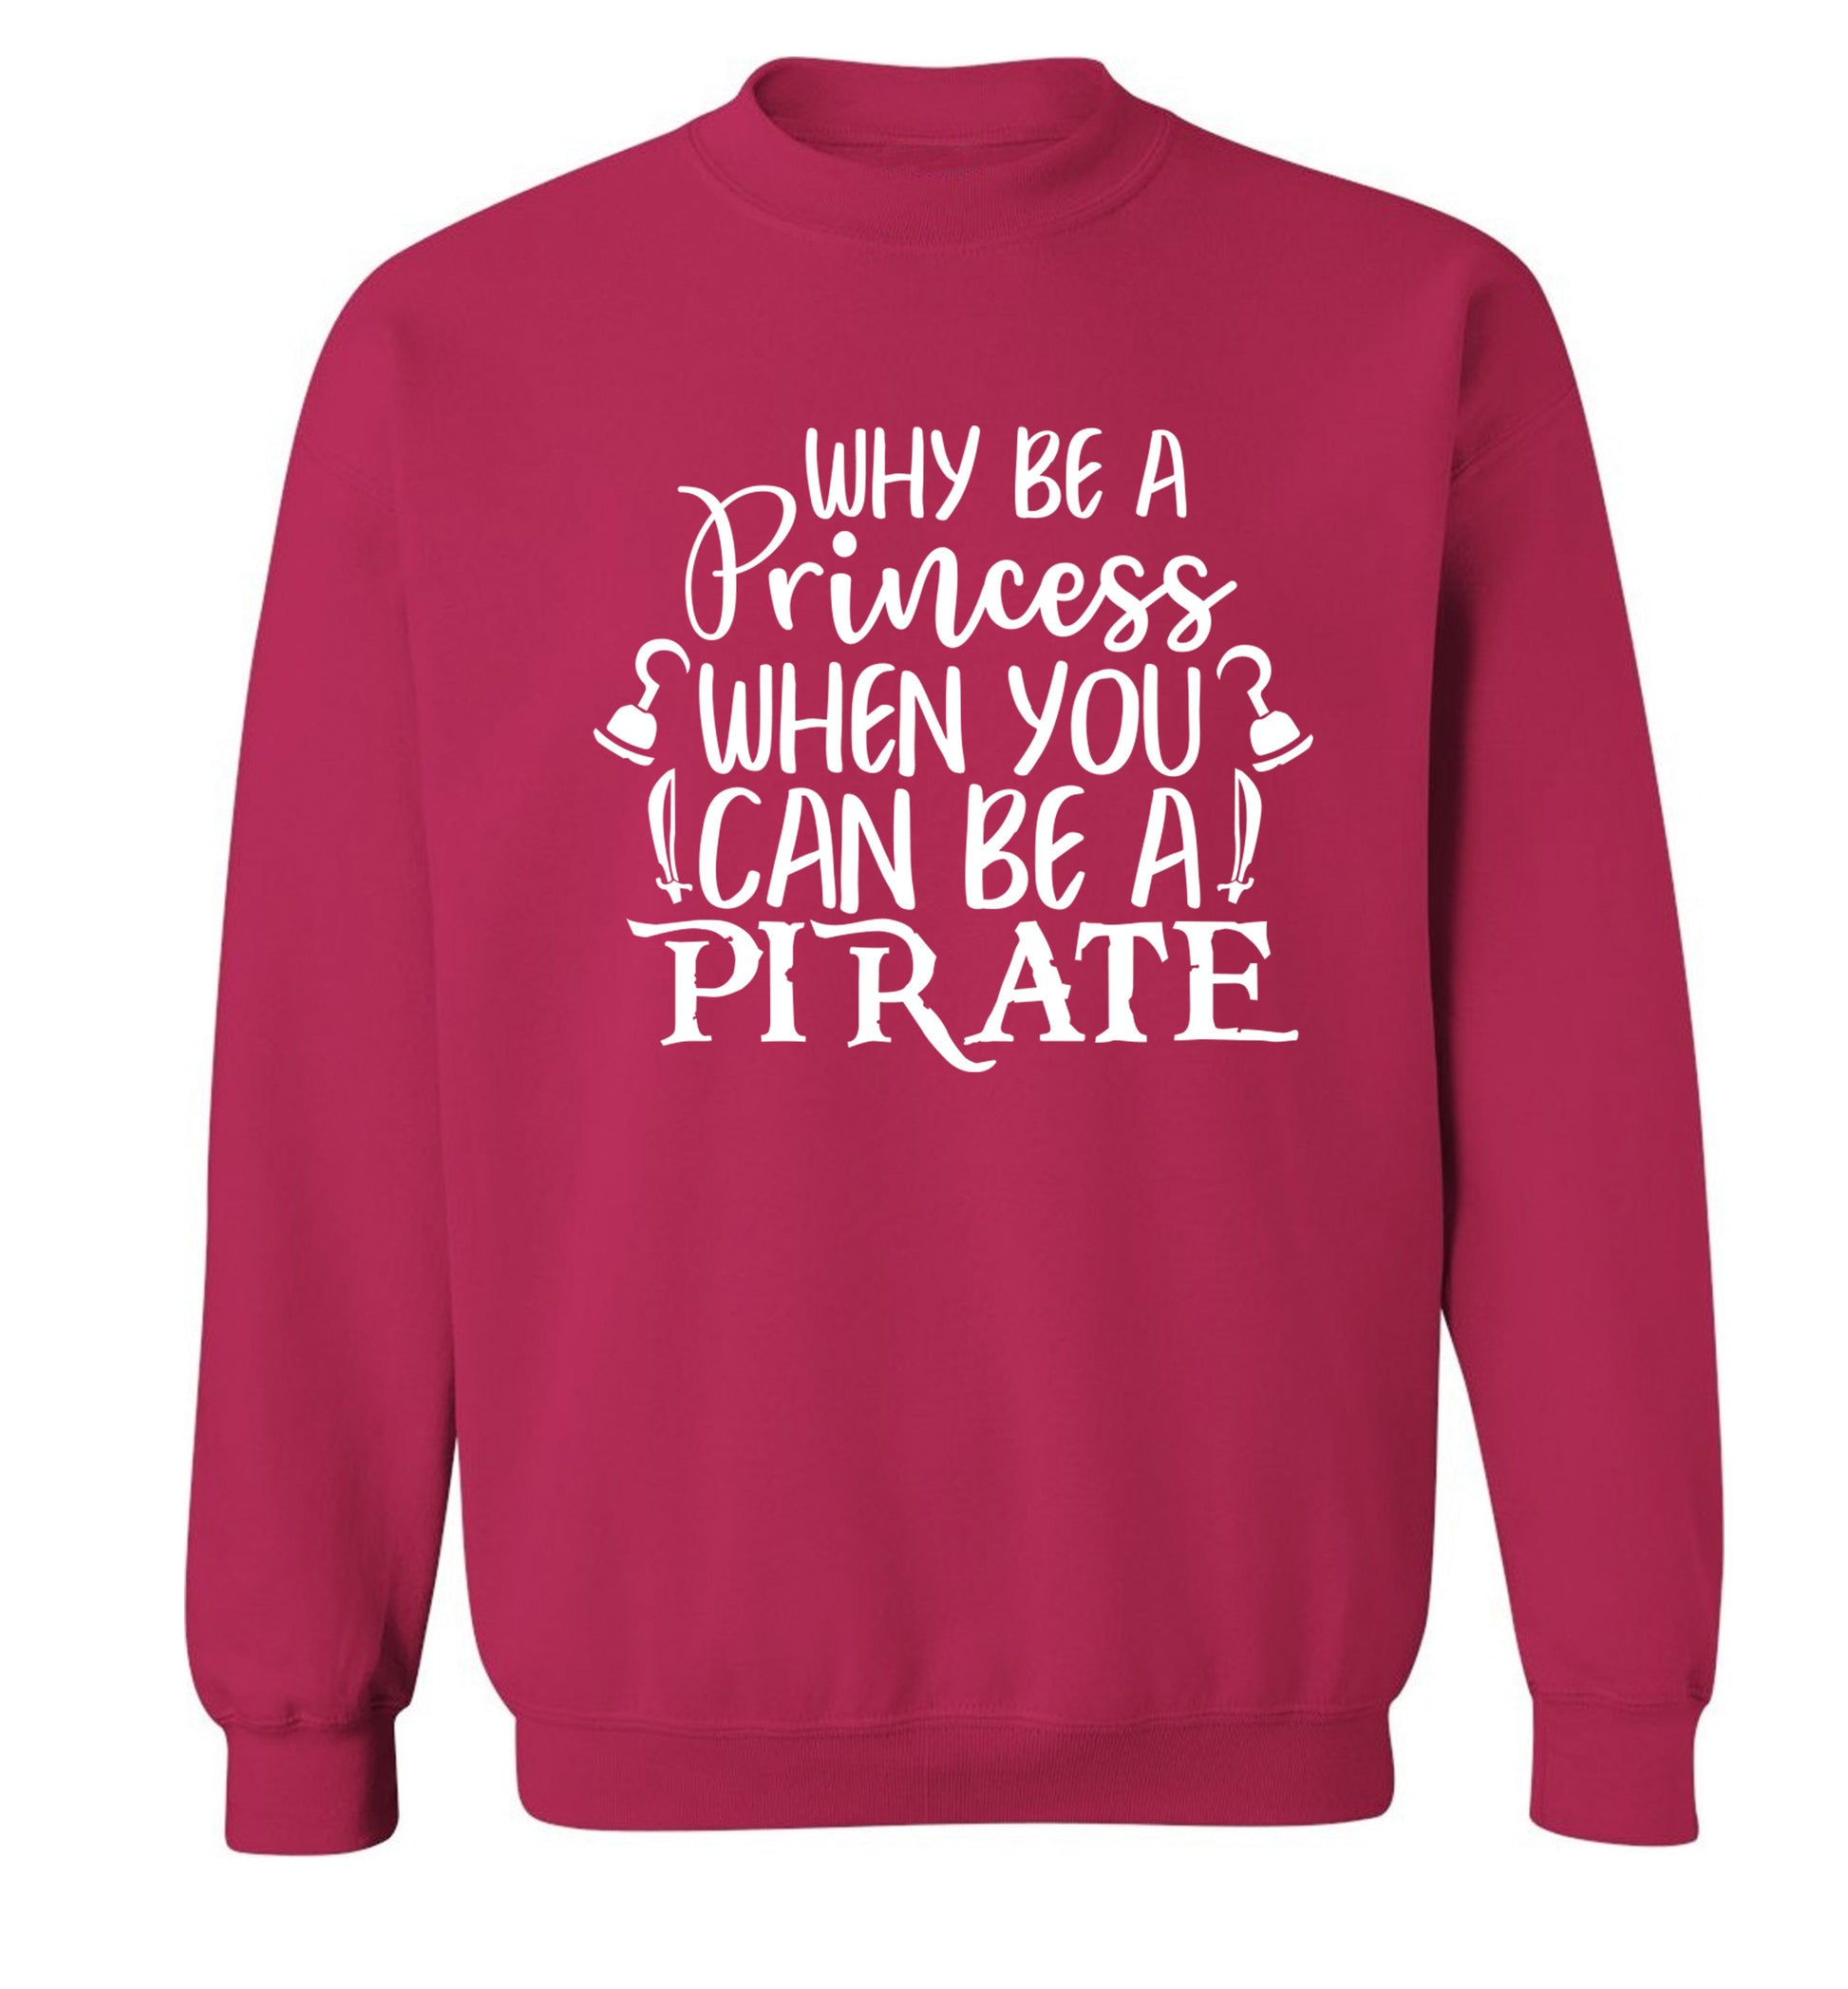 Why be a princess when you can be a pirate? Adult's unisex pink Sweater 2XL